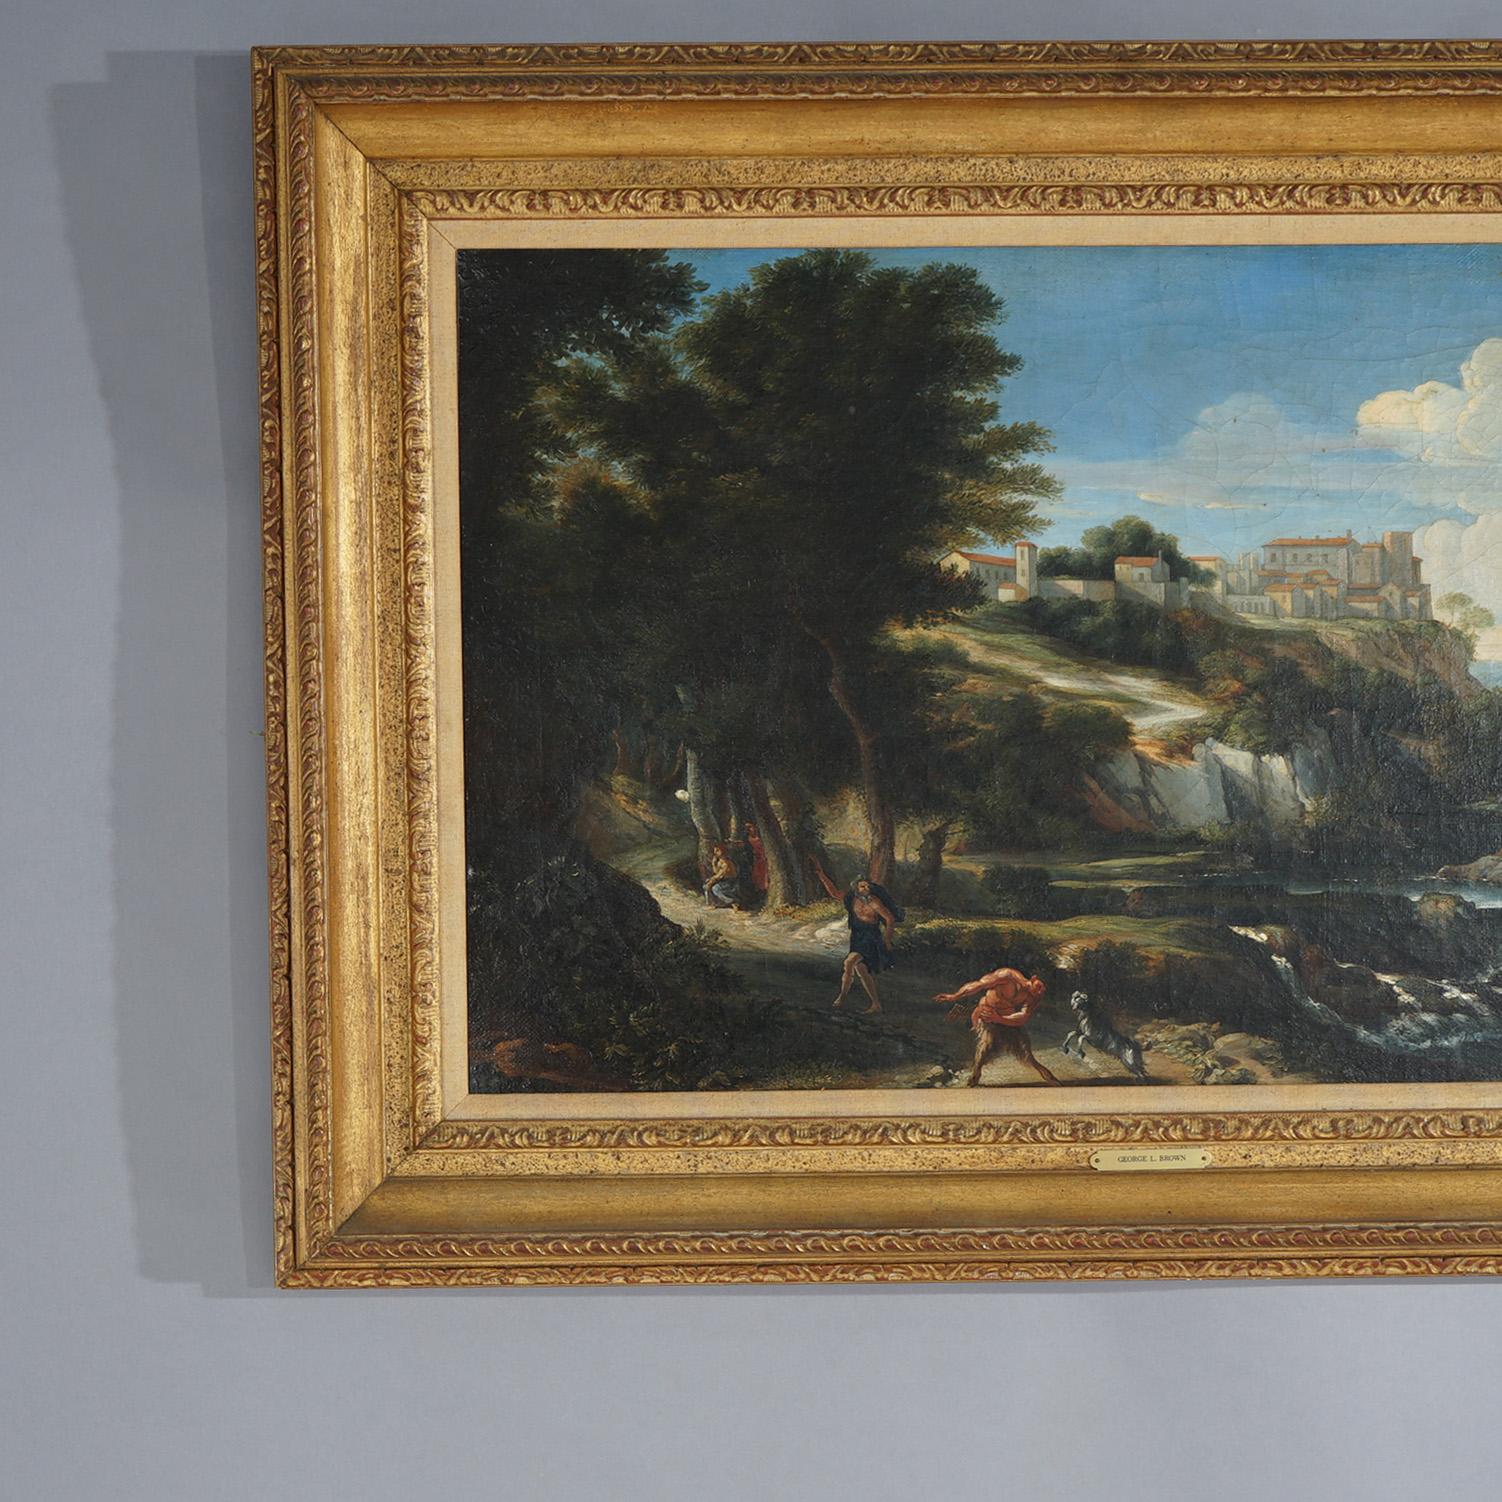 19th Century Antique Painting, Landscape with Figures by George L. Brown, 19th C